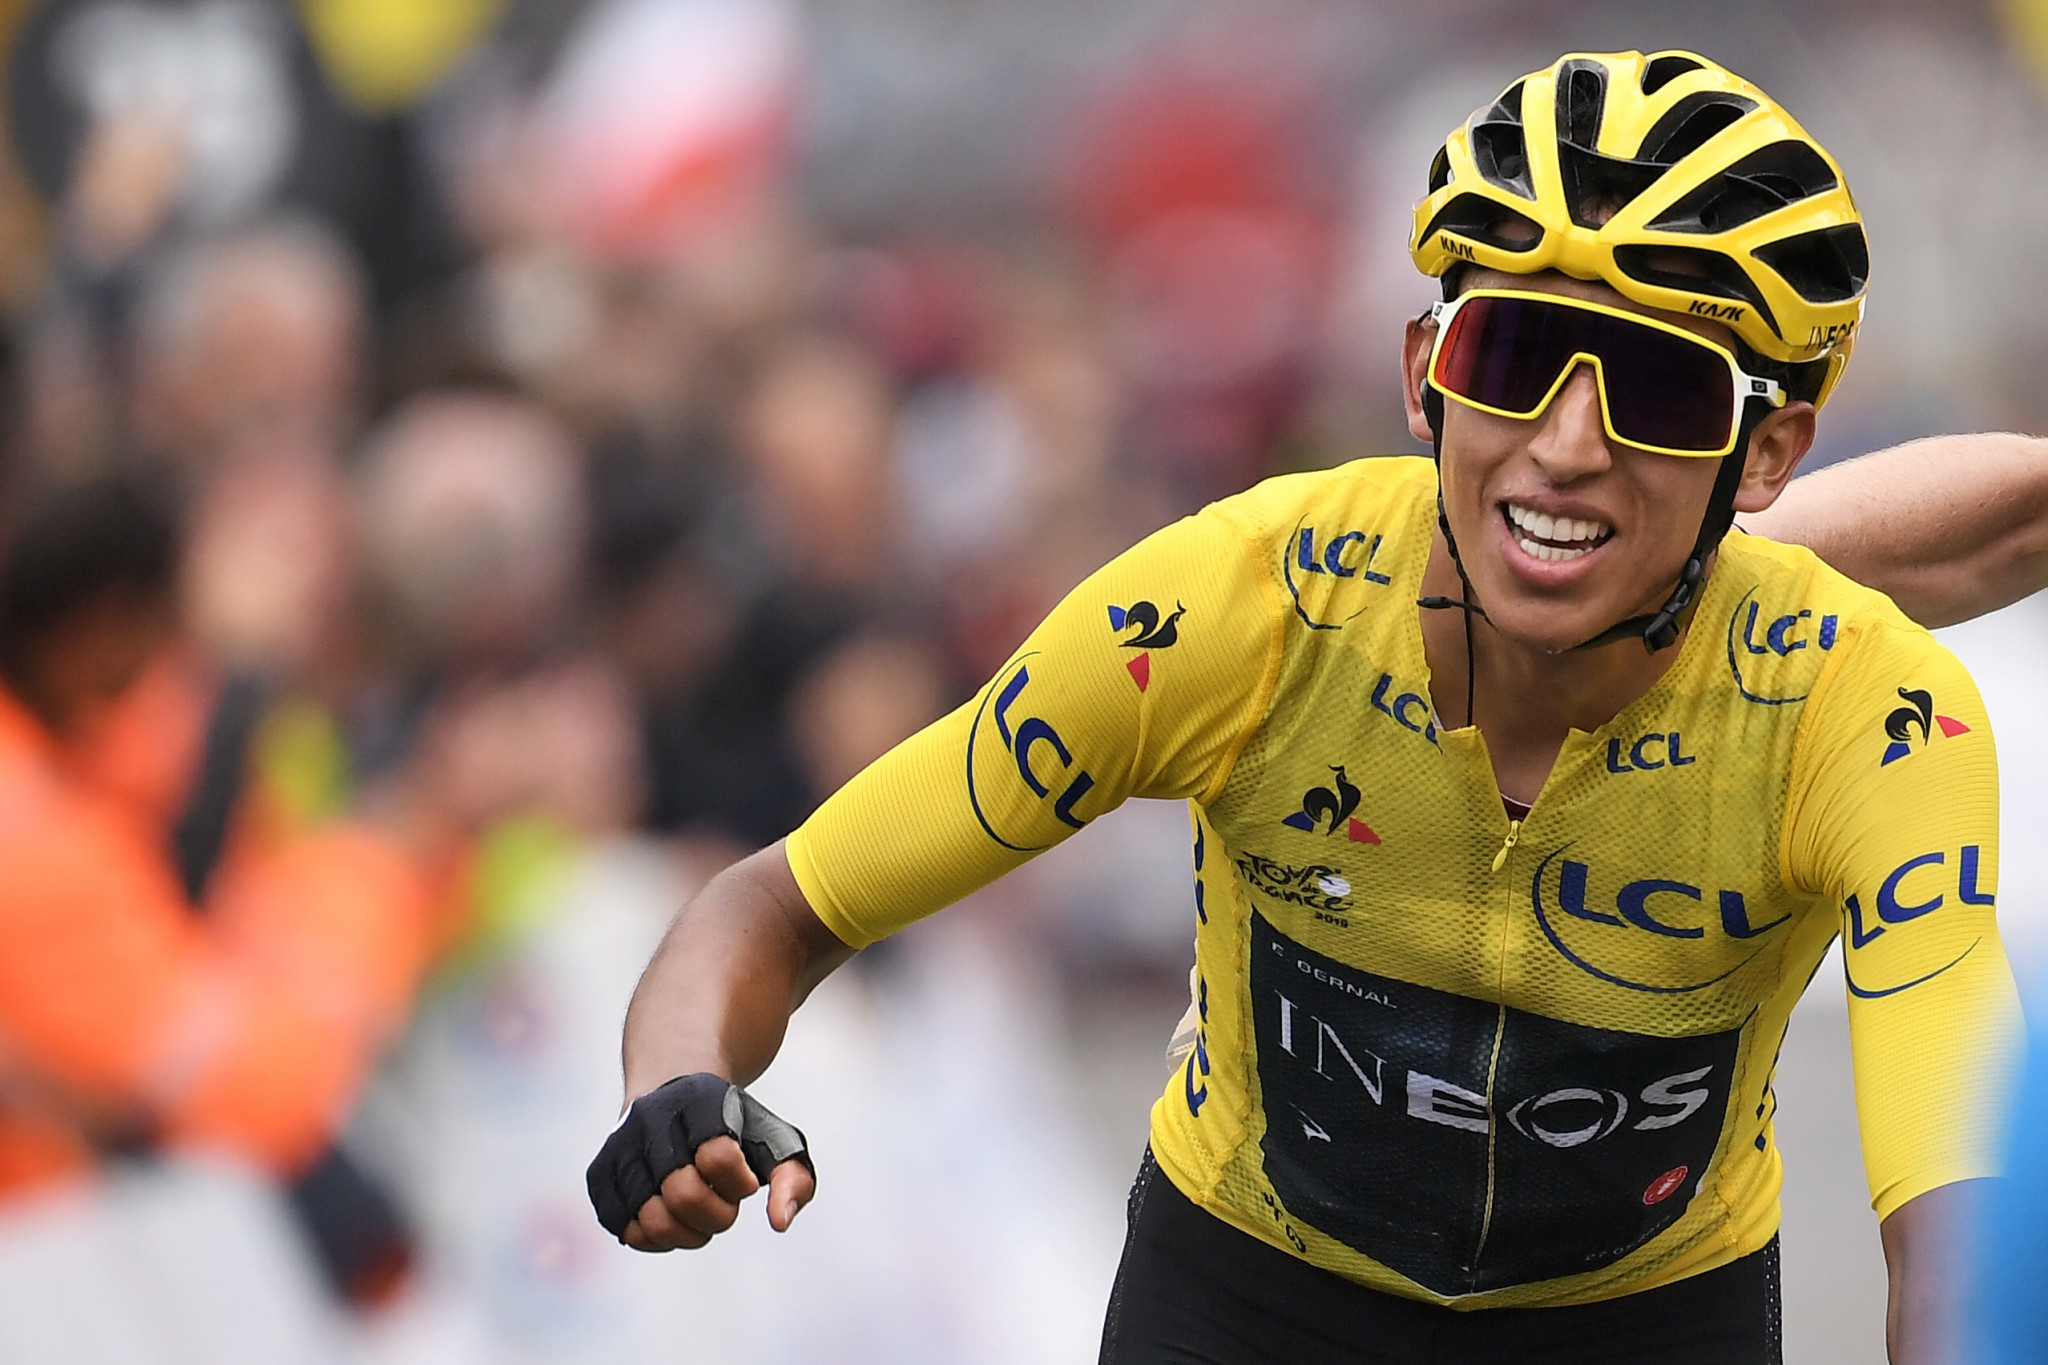 Reigning Giro d'Italia champion Egan Bernal of Colombia has been discharged from intensive care after a high-speed crash in training ©Getty Images